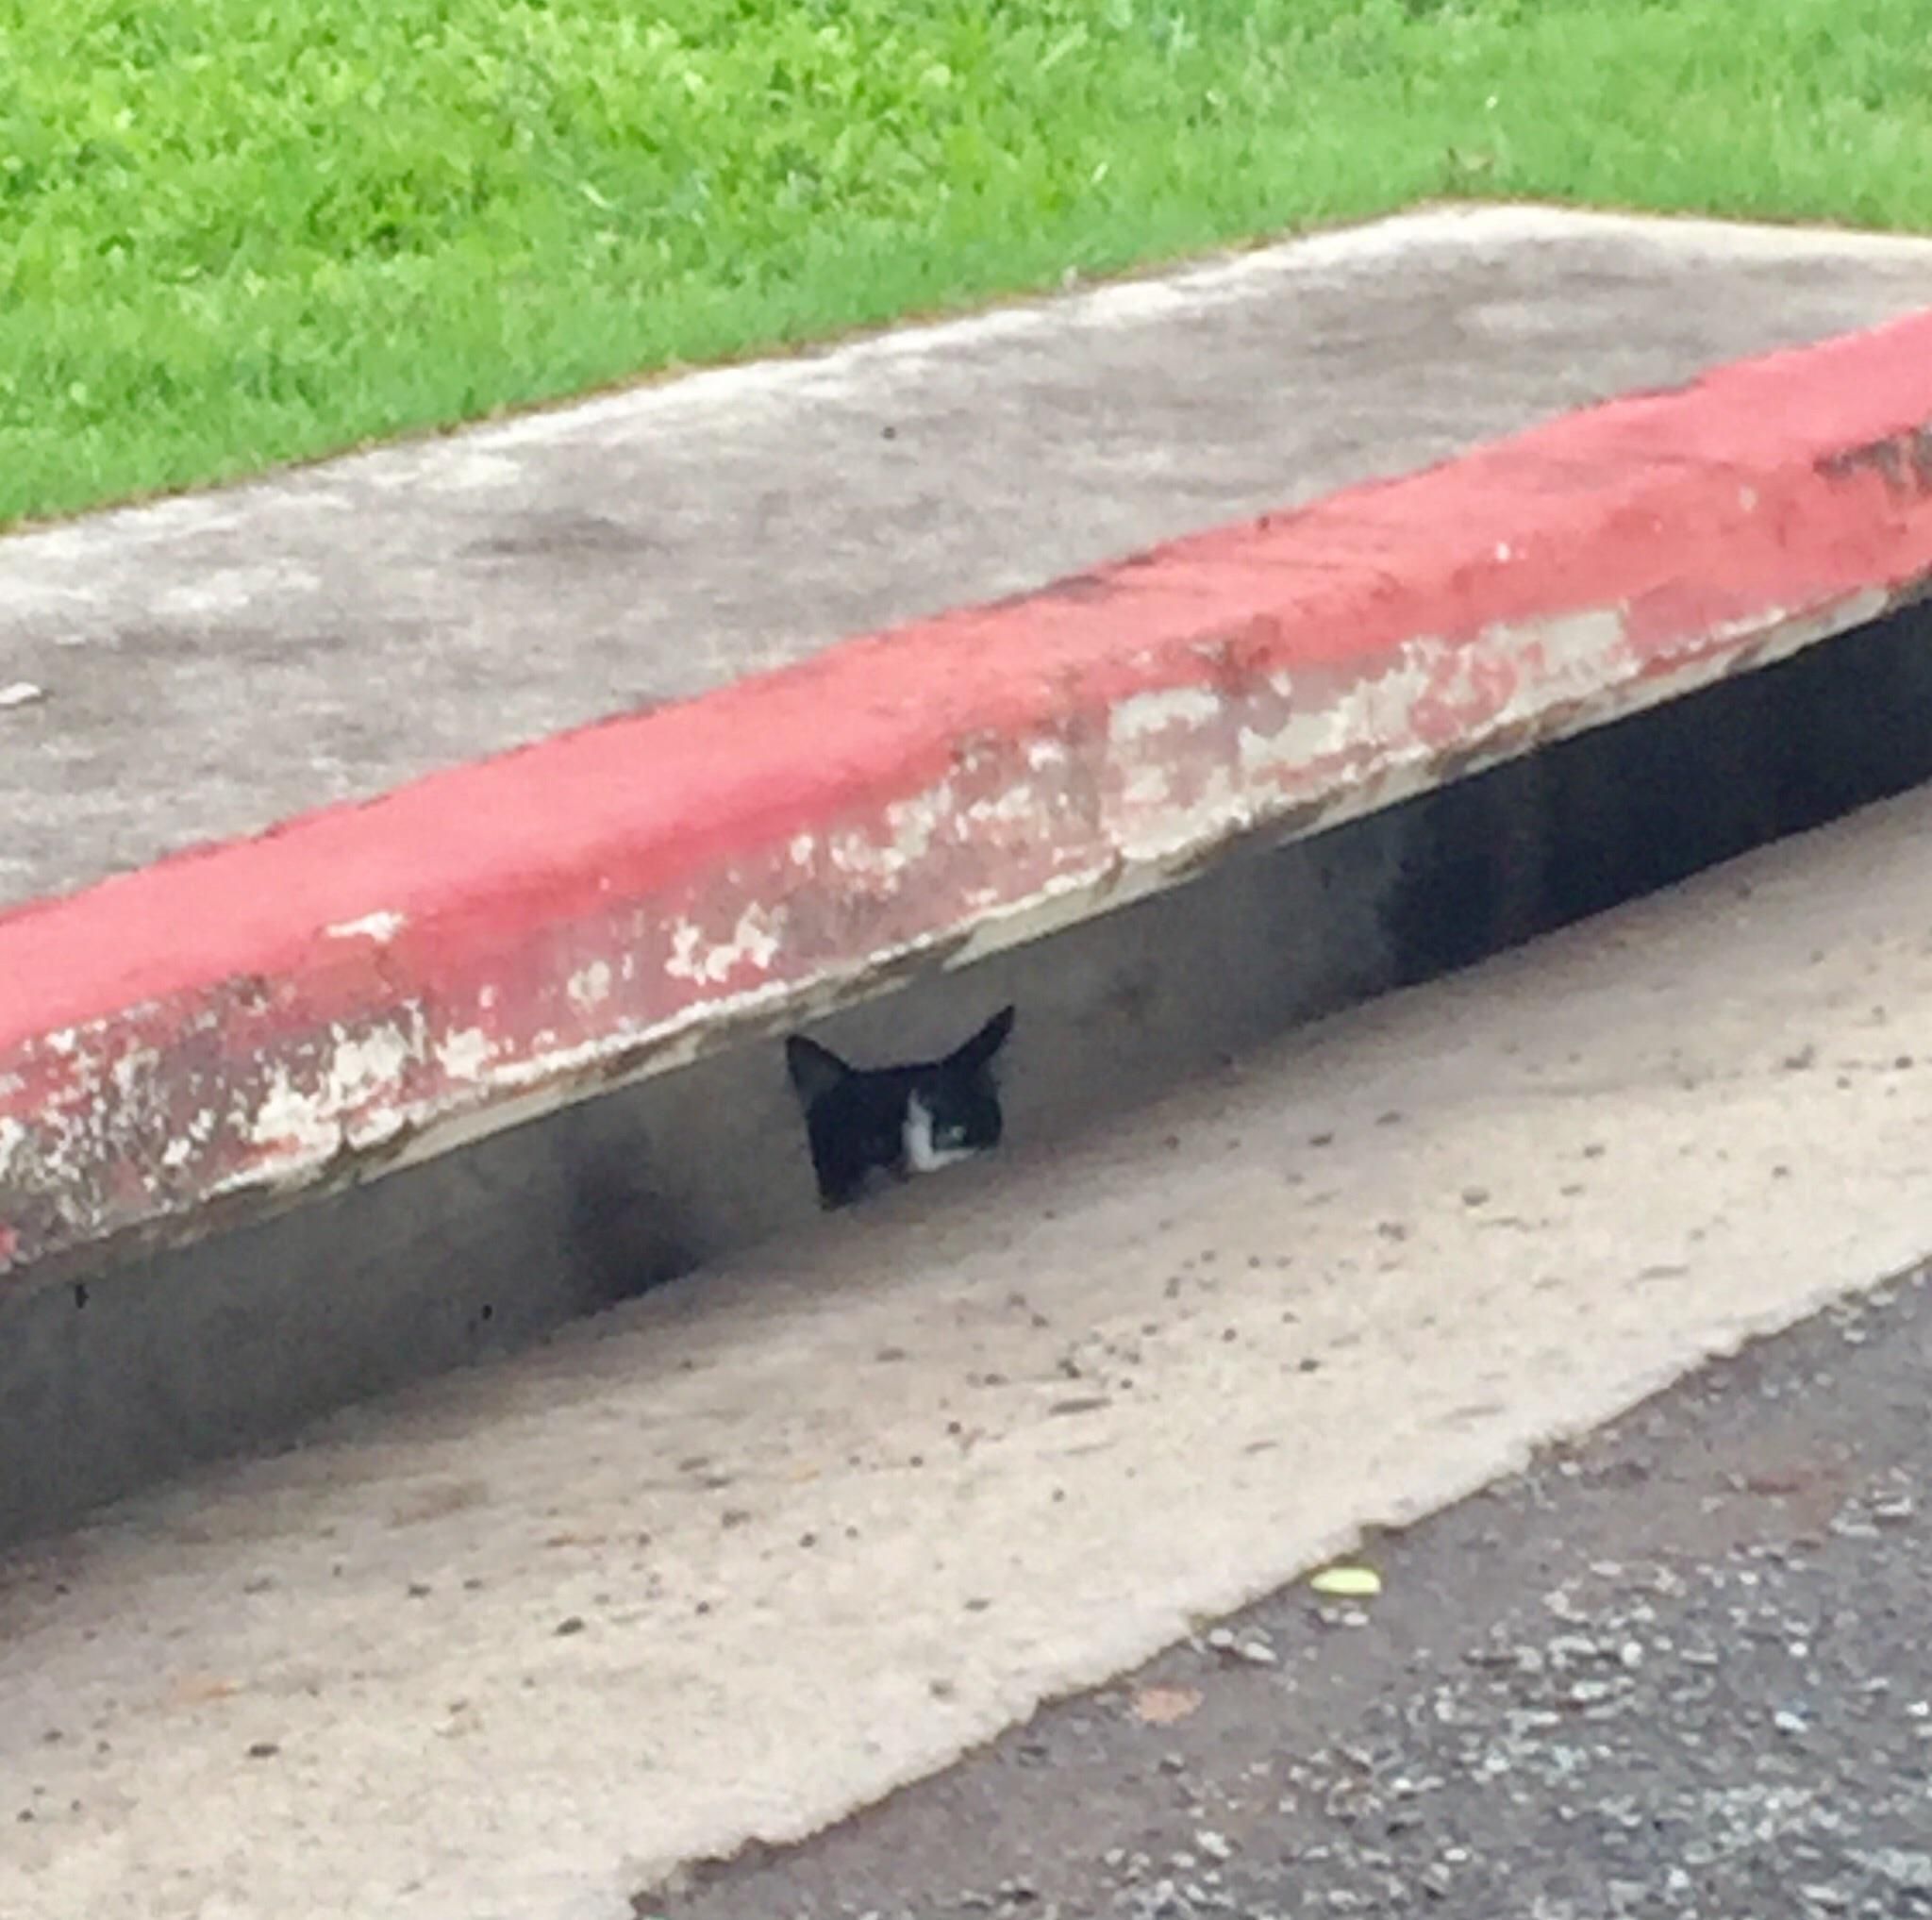 Pennywise, come grab yo cat, he’s scaring off the kids.